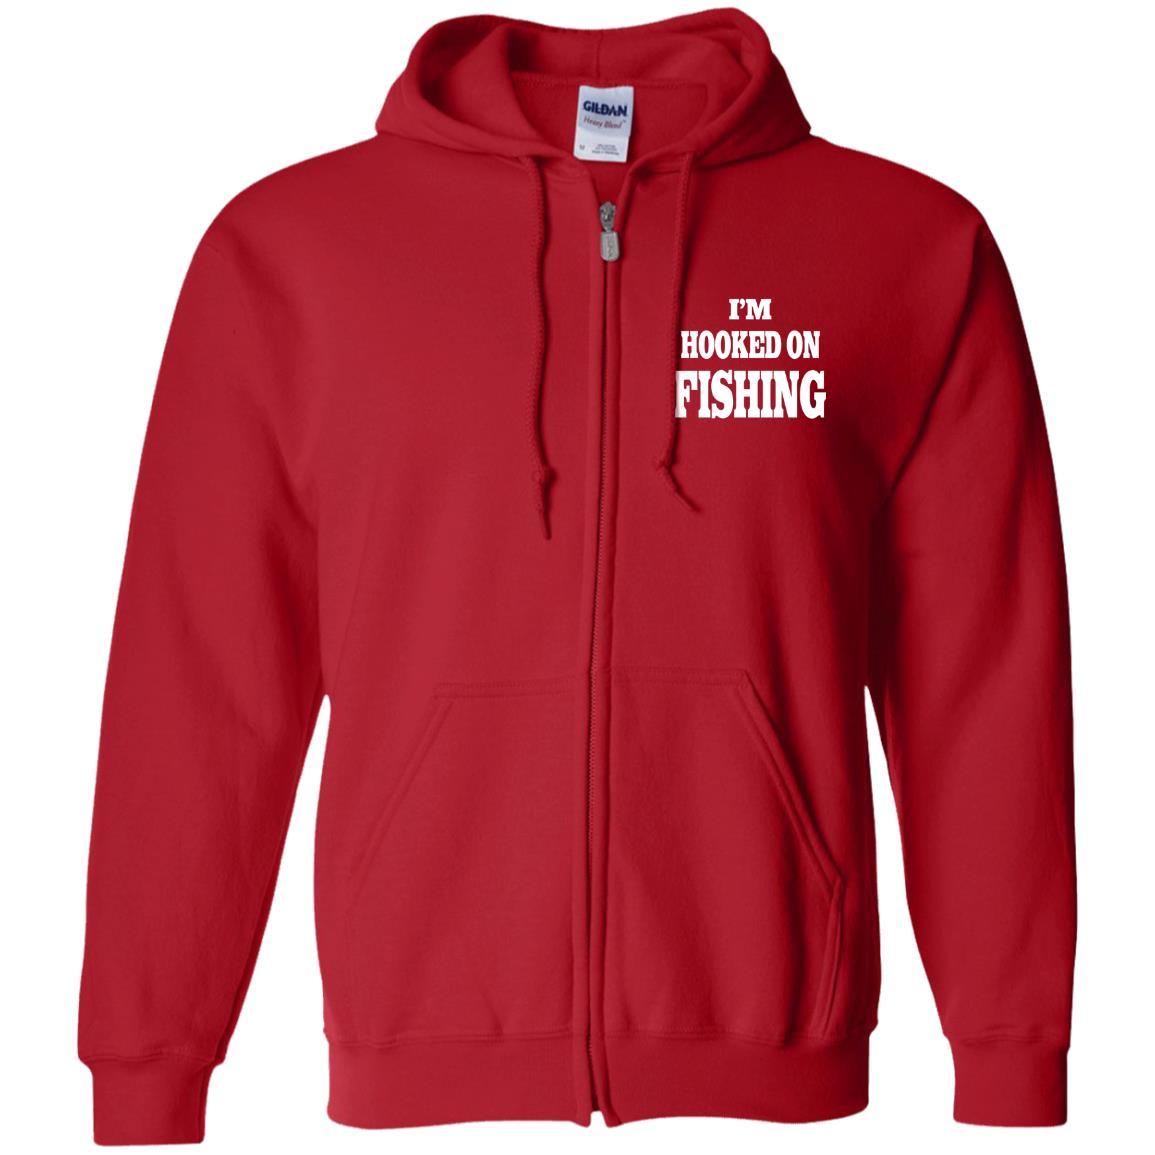 I'm hooked on fishing zip-up hoodie red